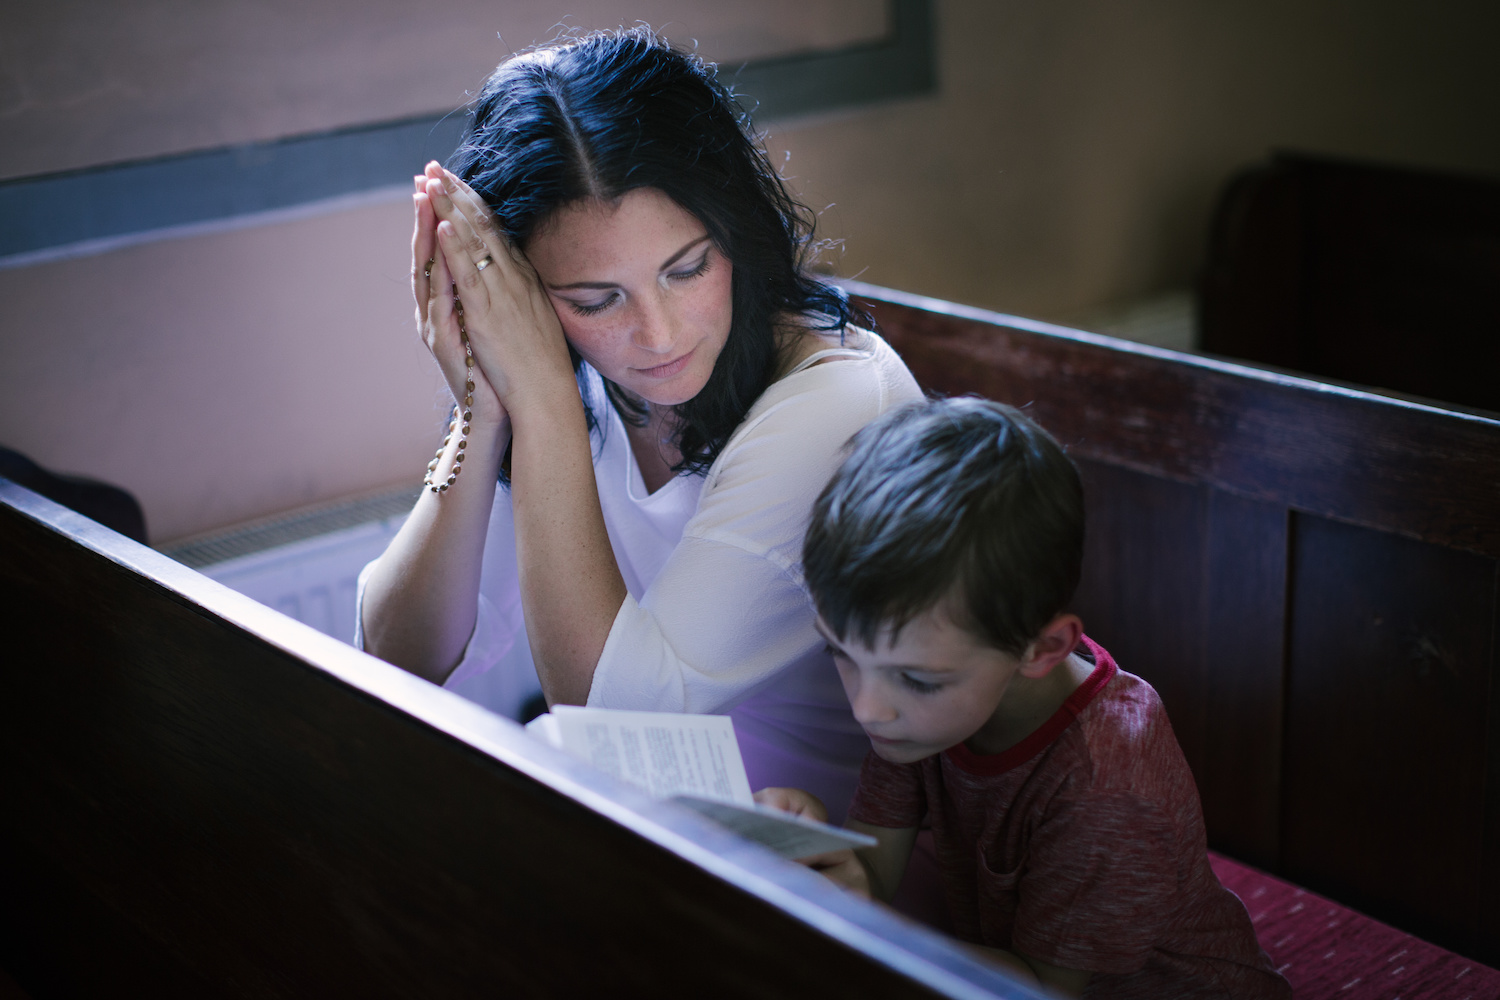 religious-services-sensory-processing-disorder-at-church